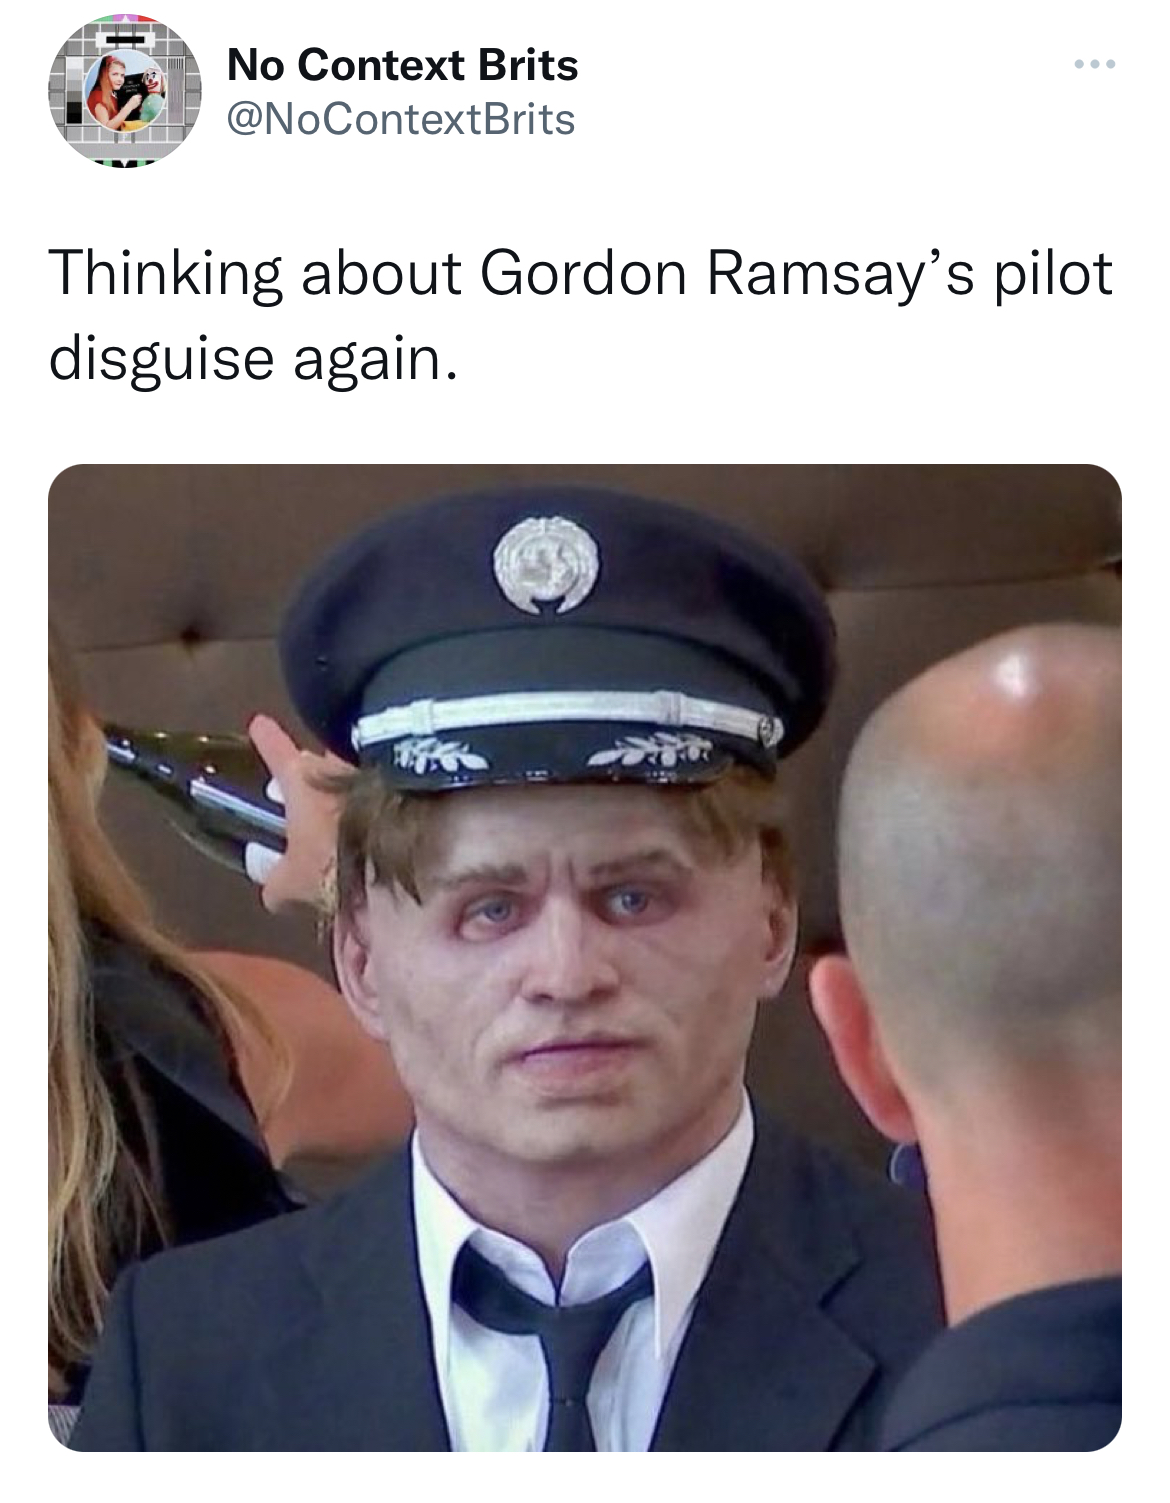 Tweets dunking on celebs - gordon ramsay pilot disguise - No Context Brits Thinking about Gordon Ramsay's pilot disguise again.